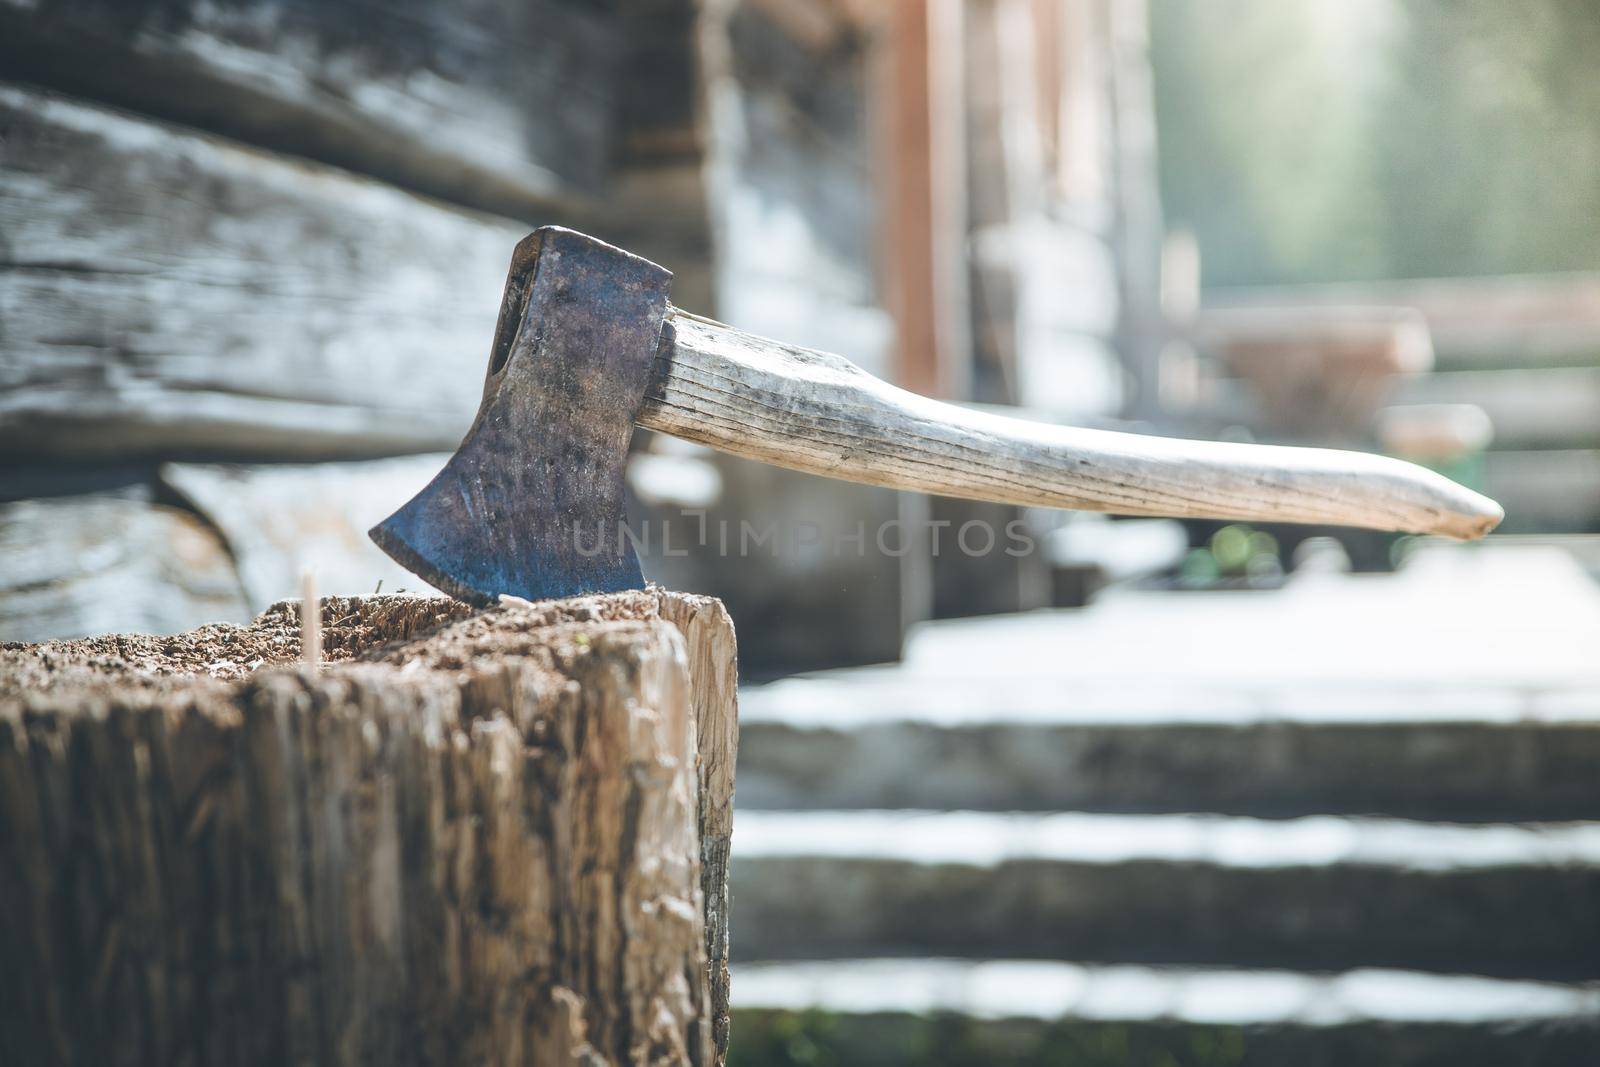 Getting wood for fire: axe attached to a tree trunk by Daxenbichler